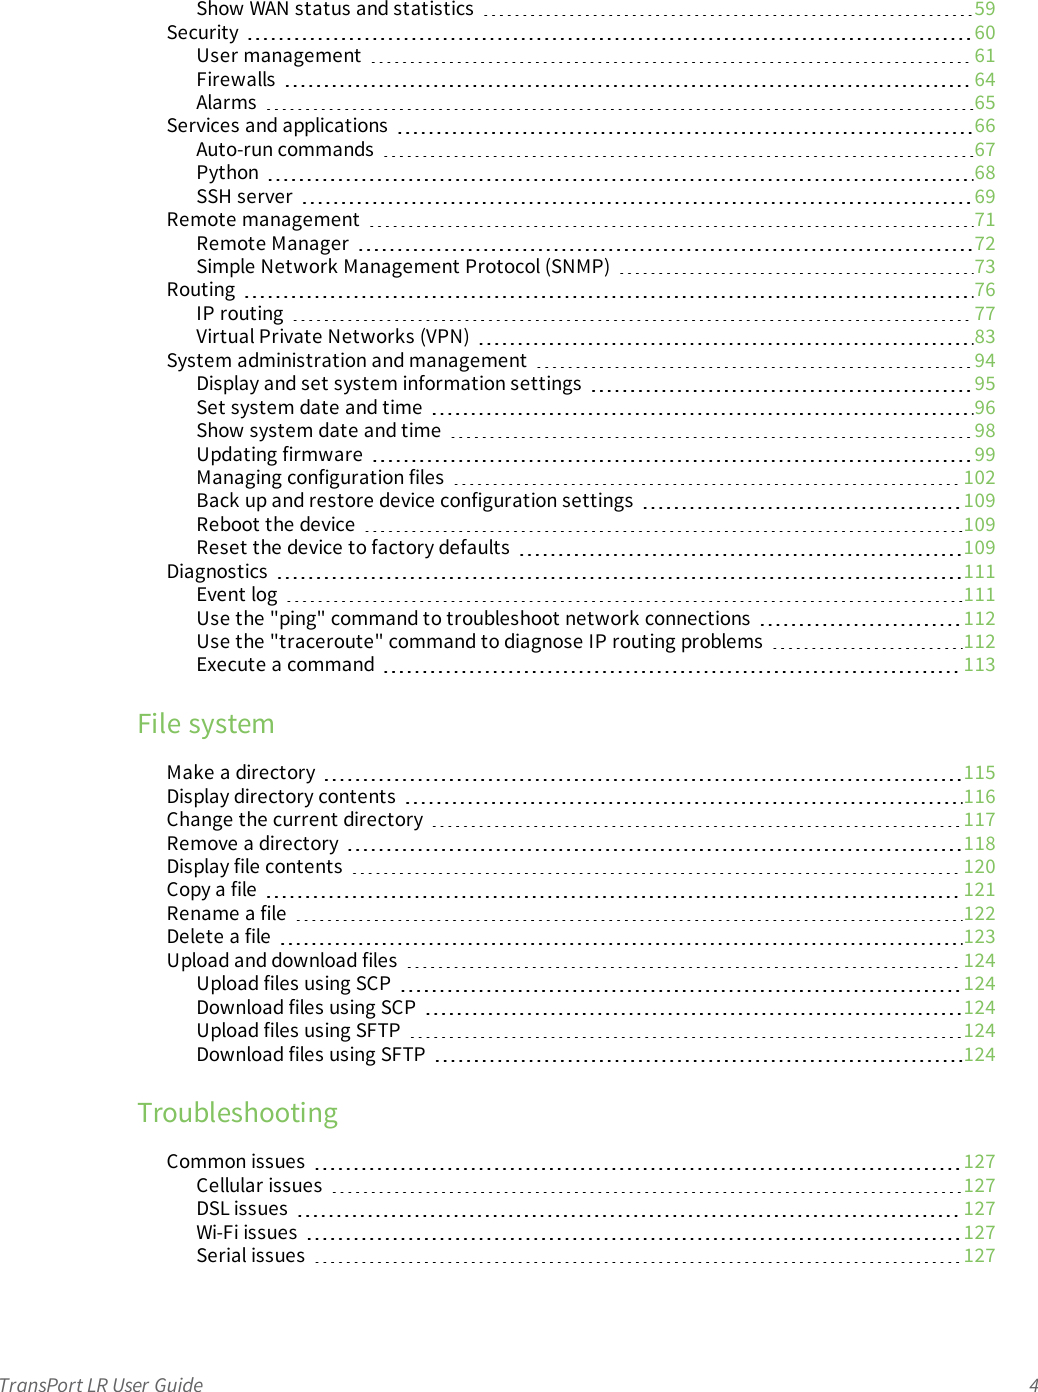 TransPort LR User Guide 4Show WAN status and statistics 59Security 60User management 61Firewalls 64Alarms 65Services and applications 66Auto-run commands 67Python 68SSH server 69Remote management 71Remote Manager 72Simple Network Management Protocol (SNMP) 73Routing 76IP routing 77Virtual Private Networks (VPN) 83System administration and management 94Display and set system information settings 95Set system date and time 96Show system date and time 98Updating firmware 99Managing configuration files 102Back up and restore device configuration settings 109Reboot the device 109Reset the device to factory defaults 109Diagnostics 111Event log 111Use the &quot;ping&quot; command to troubleshoot network connections 112Use the &quot;traceroute&quot; command to diagnose IProuting problems 112Execute a command 113File systemMake a directory 115Display directory contents 116Change the current directory 117Remove a directory 118Display file contents 120Copy a file 121Rename a file 122Delete a file 123Upload and download files 124Upload files using SCP 124Download files using SCP 124Upload files using SFTP 124Download files using SFTP 124TroubleshootingCommon issues 127Cellular issues 127DSL issues 127Wi-Fi issues 127Serial issues 127